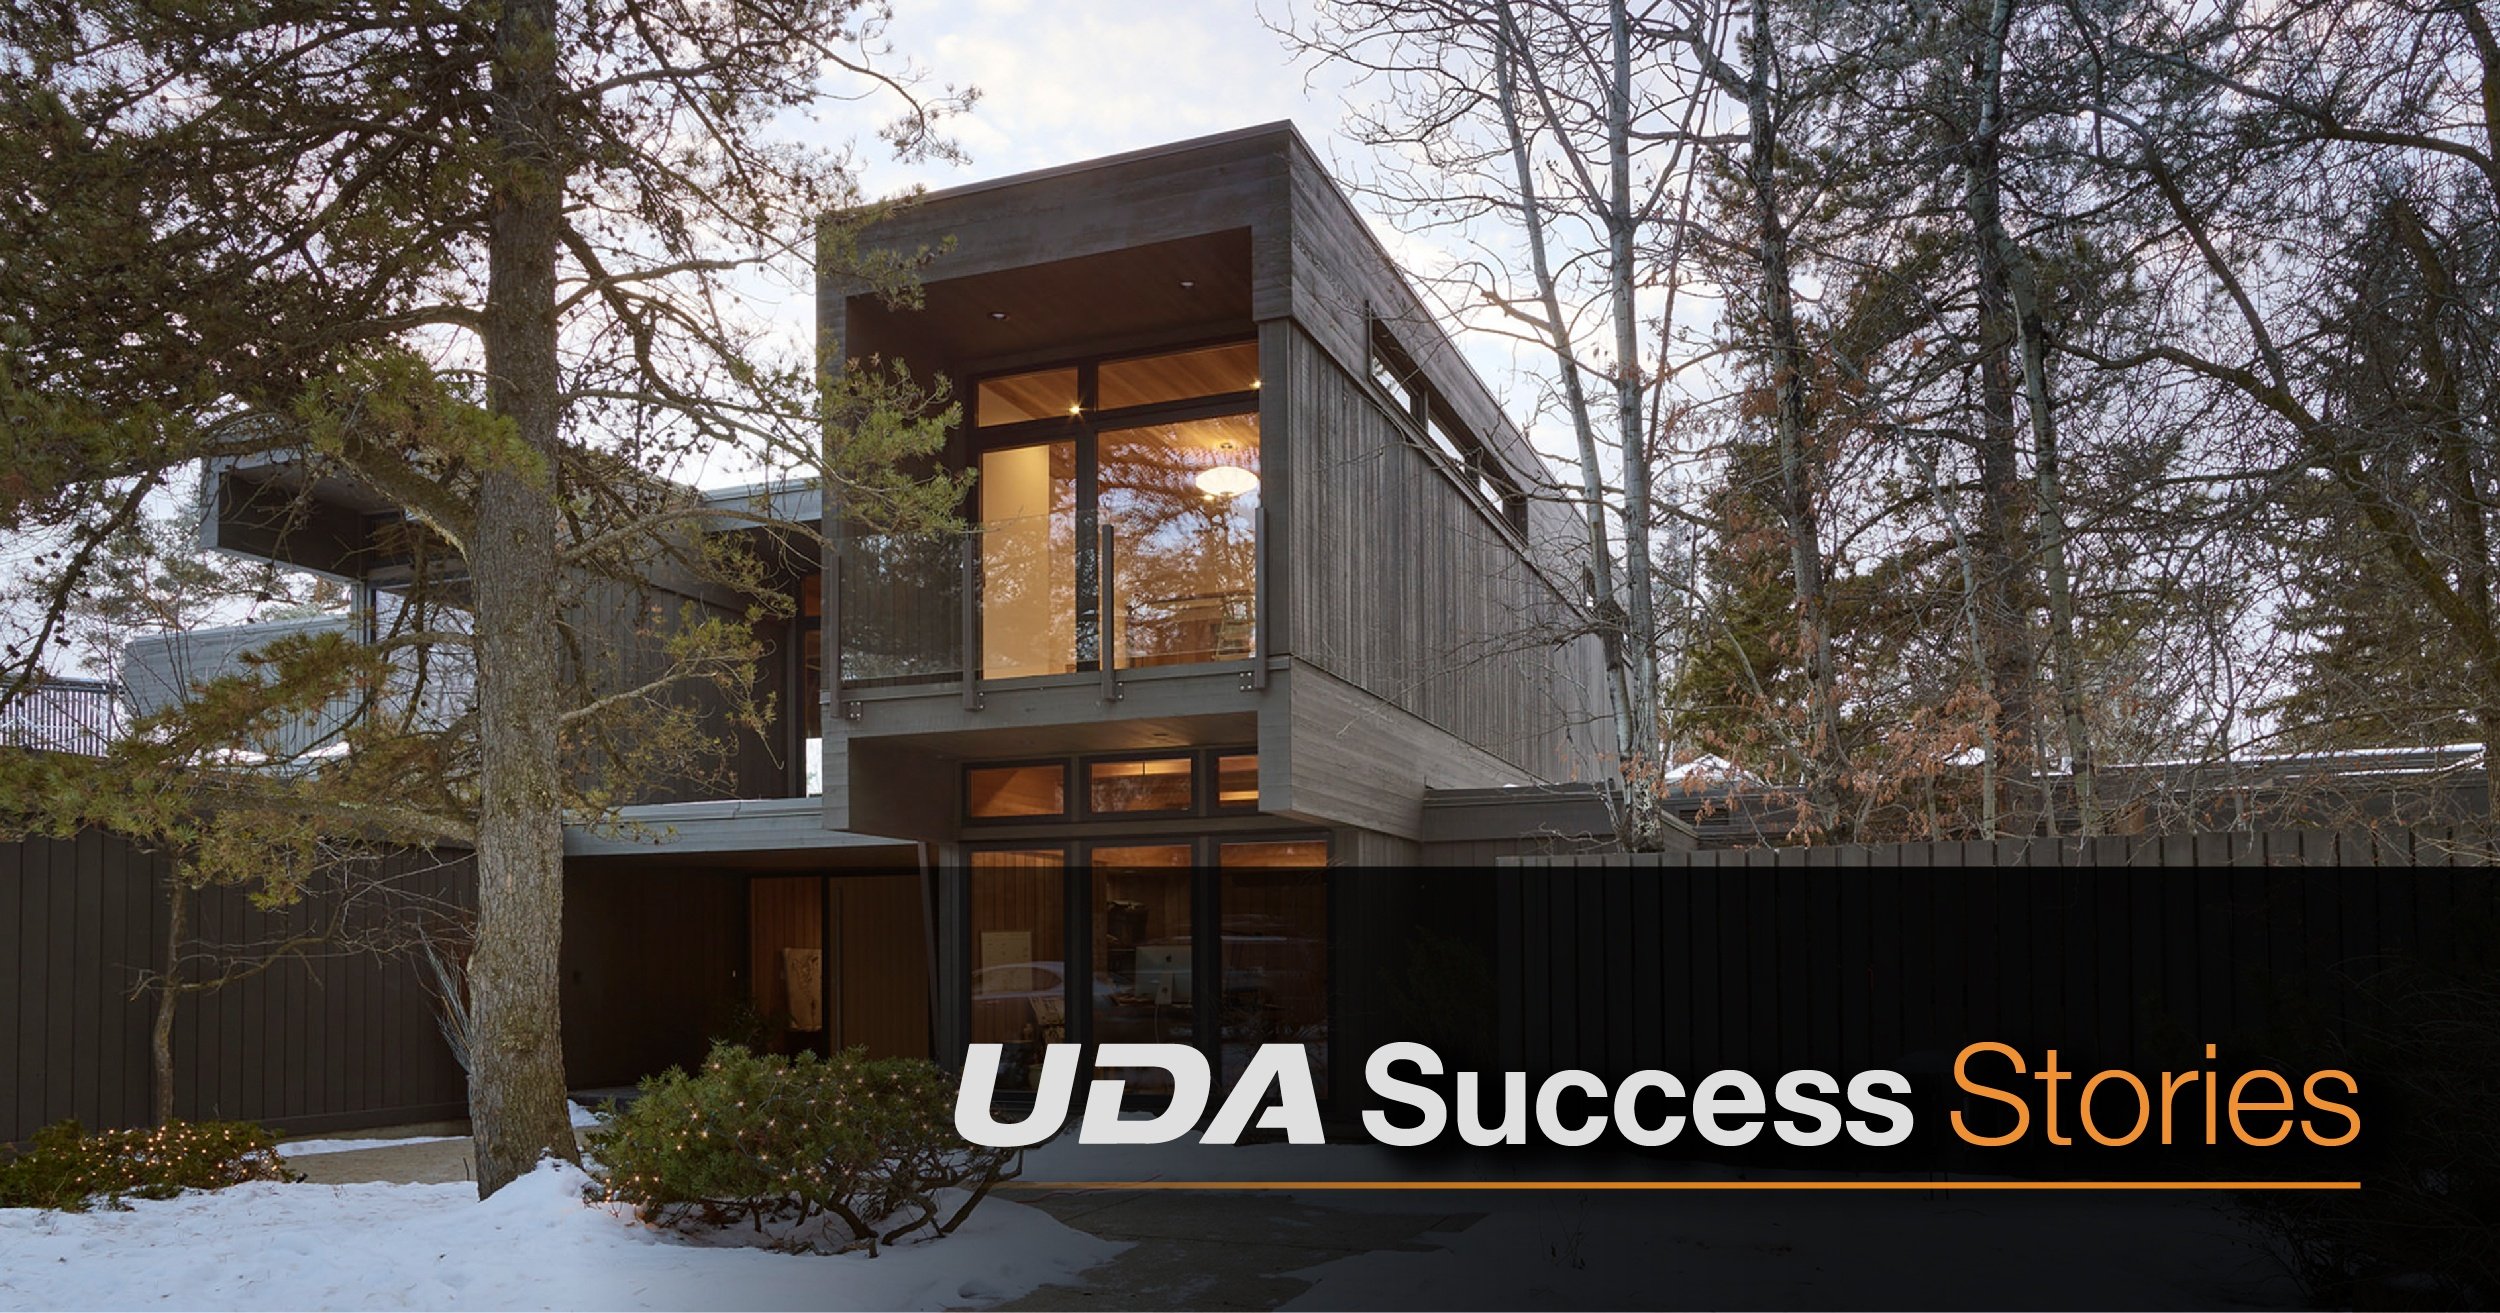 Client Success Stories Featured on New UDA Technologies Blog